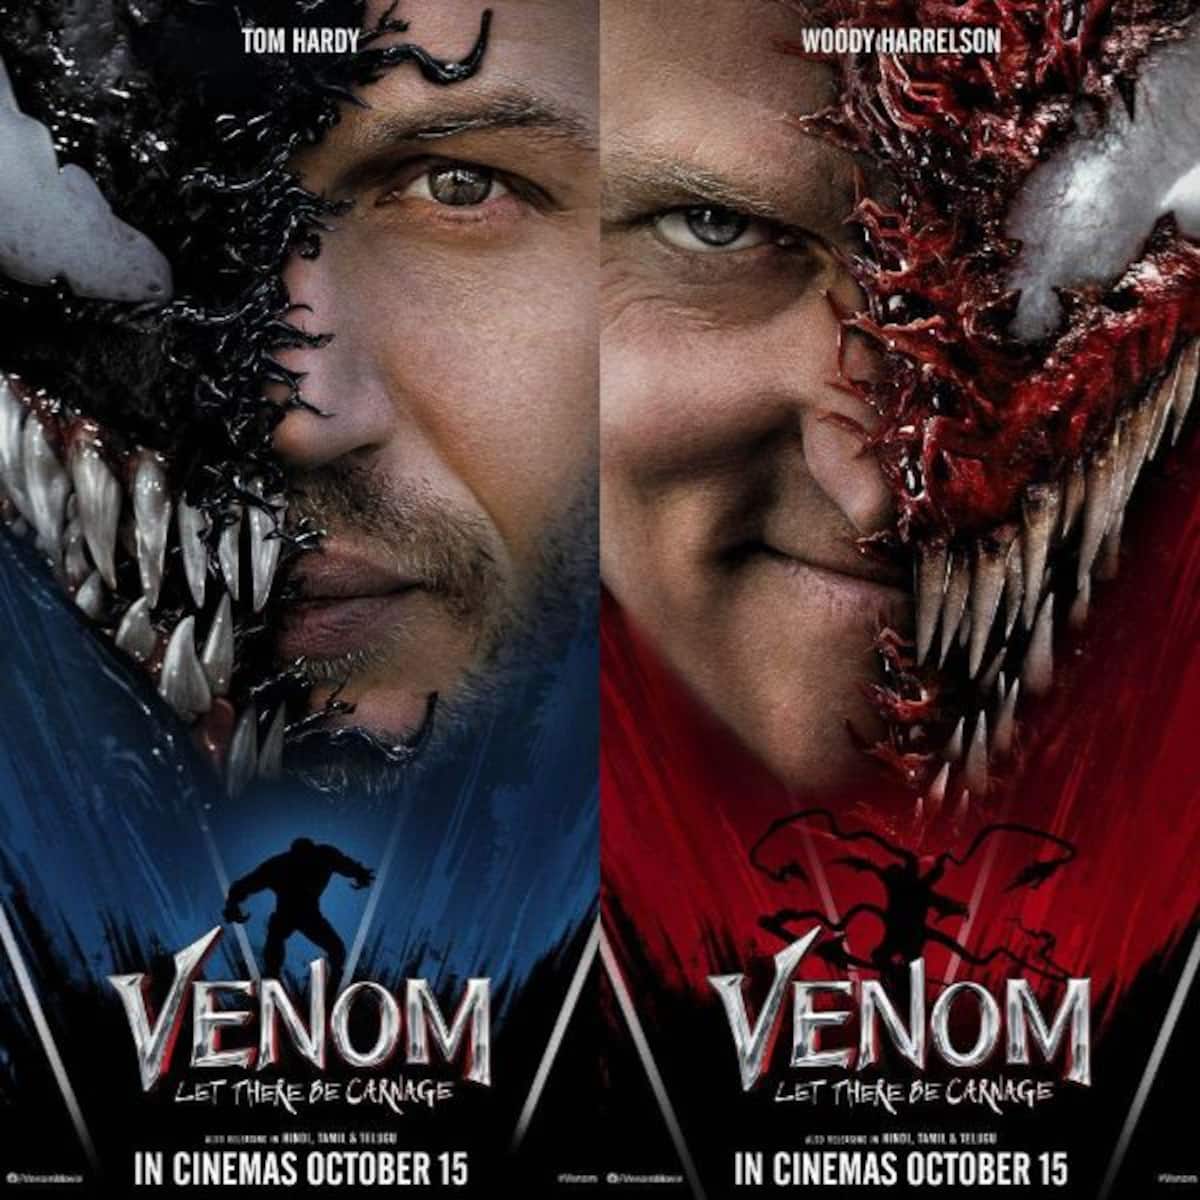 Venom Let There Be Carnage: Tom Hardy as Venom, Woody Harrelson as Carnage and other character posters that have us jumping with excitement for the superhero movie